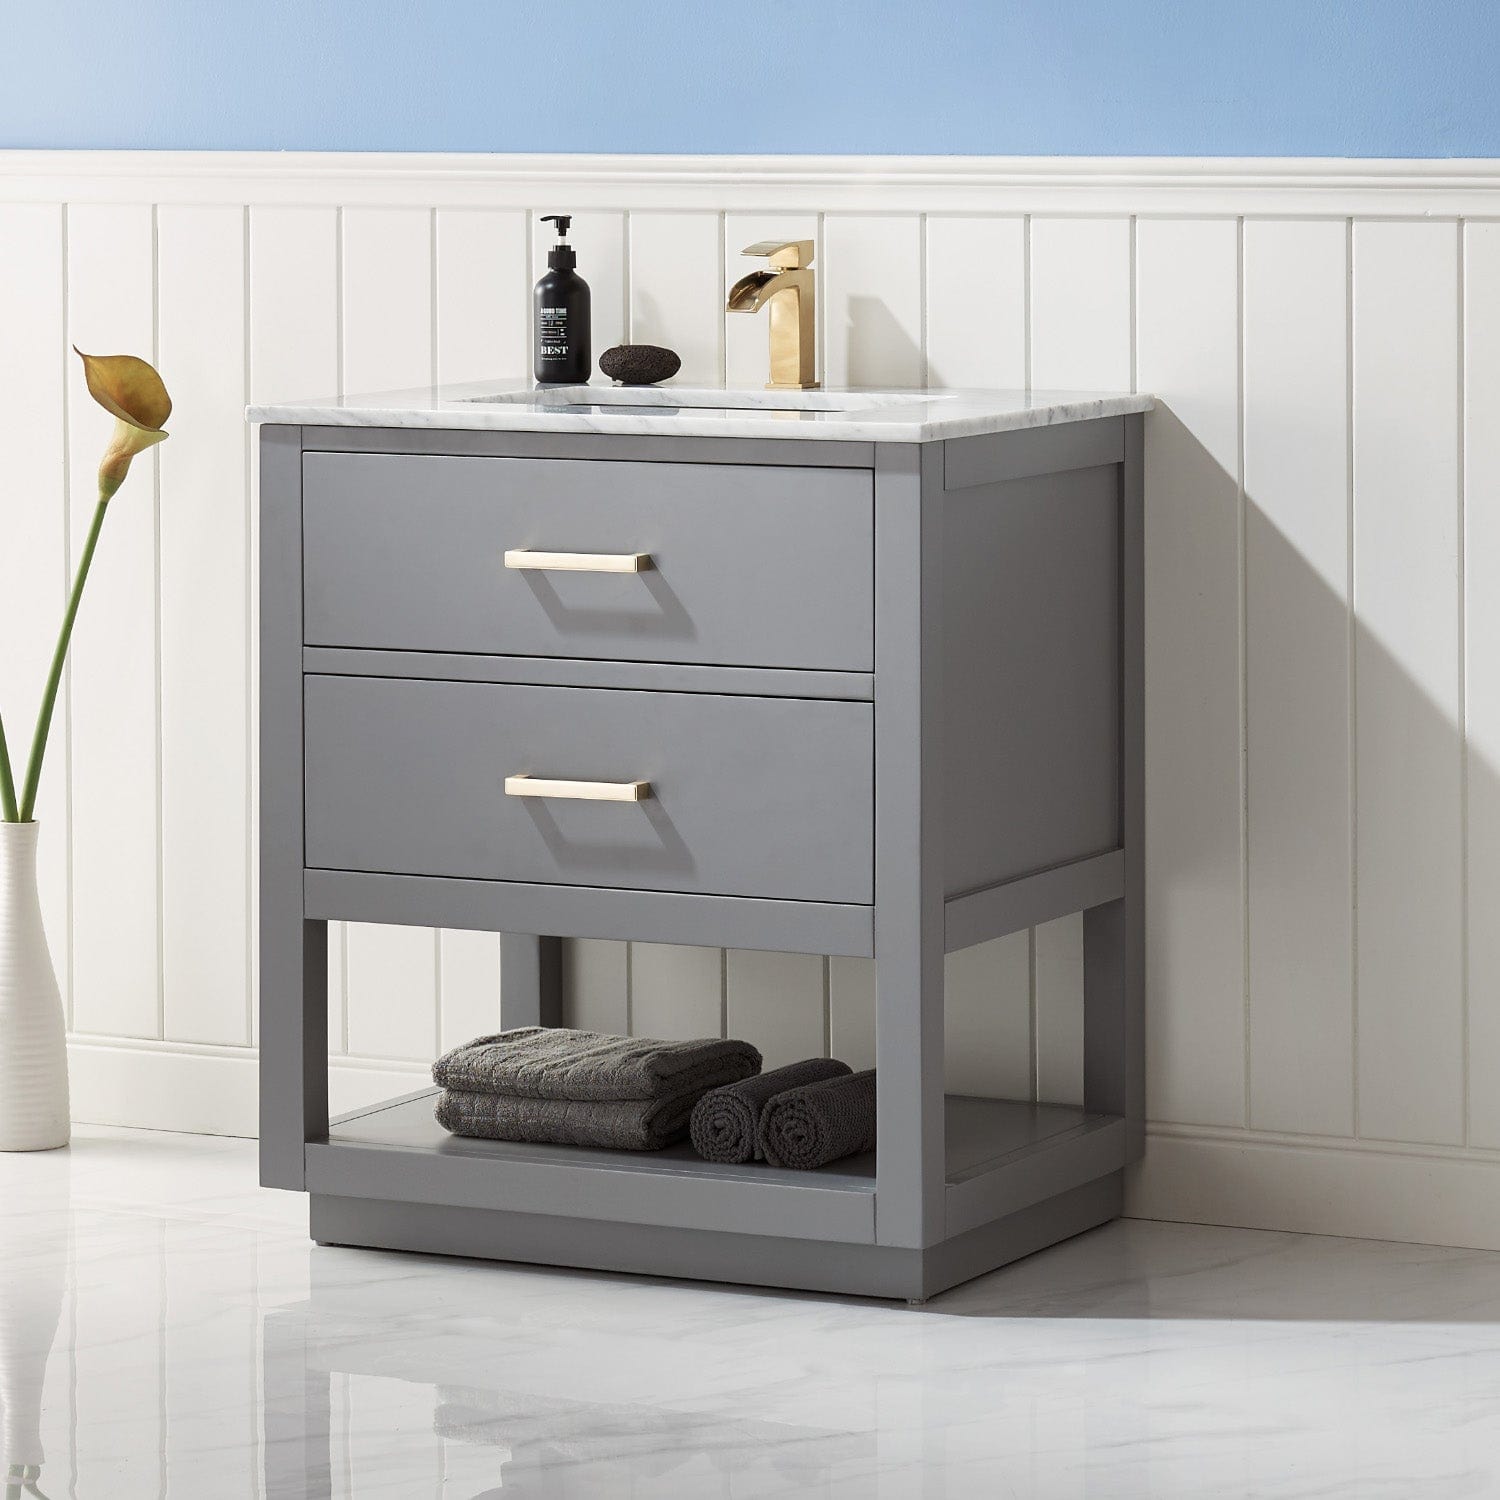 Altair Remi 30" Single Bathroom Vanity Set in Gray and Carrara White Marble Countertop without Mirror 532030-GR-CA-NM - Molaix631112971348Vanity532030-GR-CA-NM